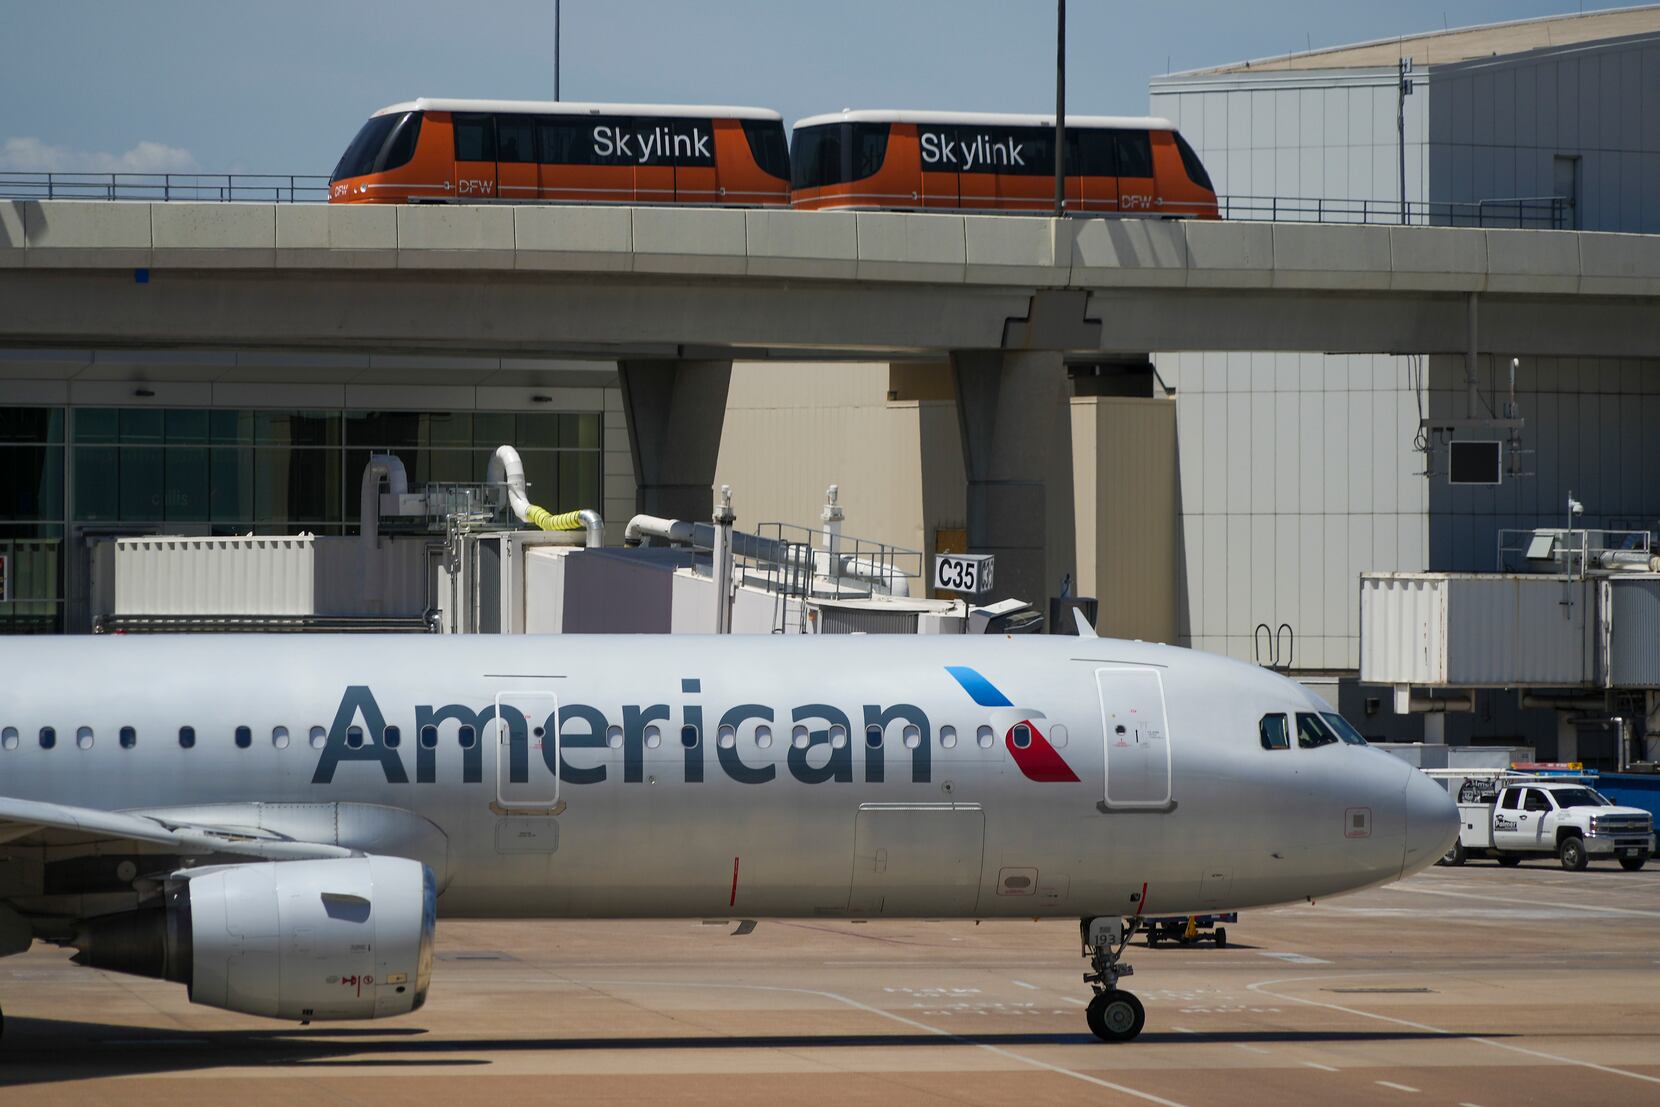 American Airlines makes cuts, changes due to drop in business travel